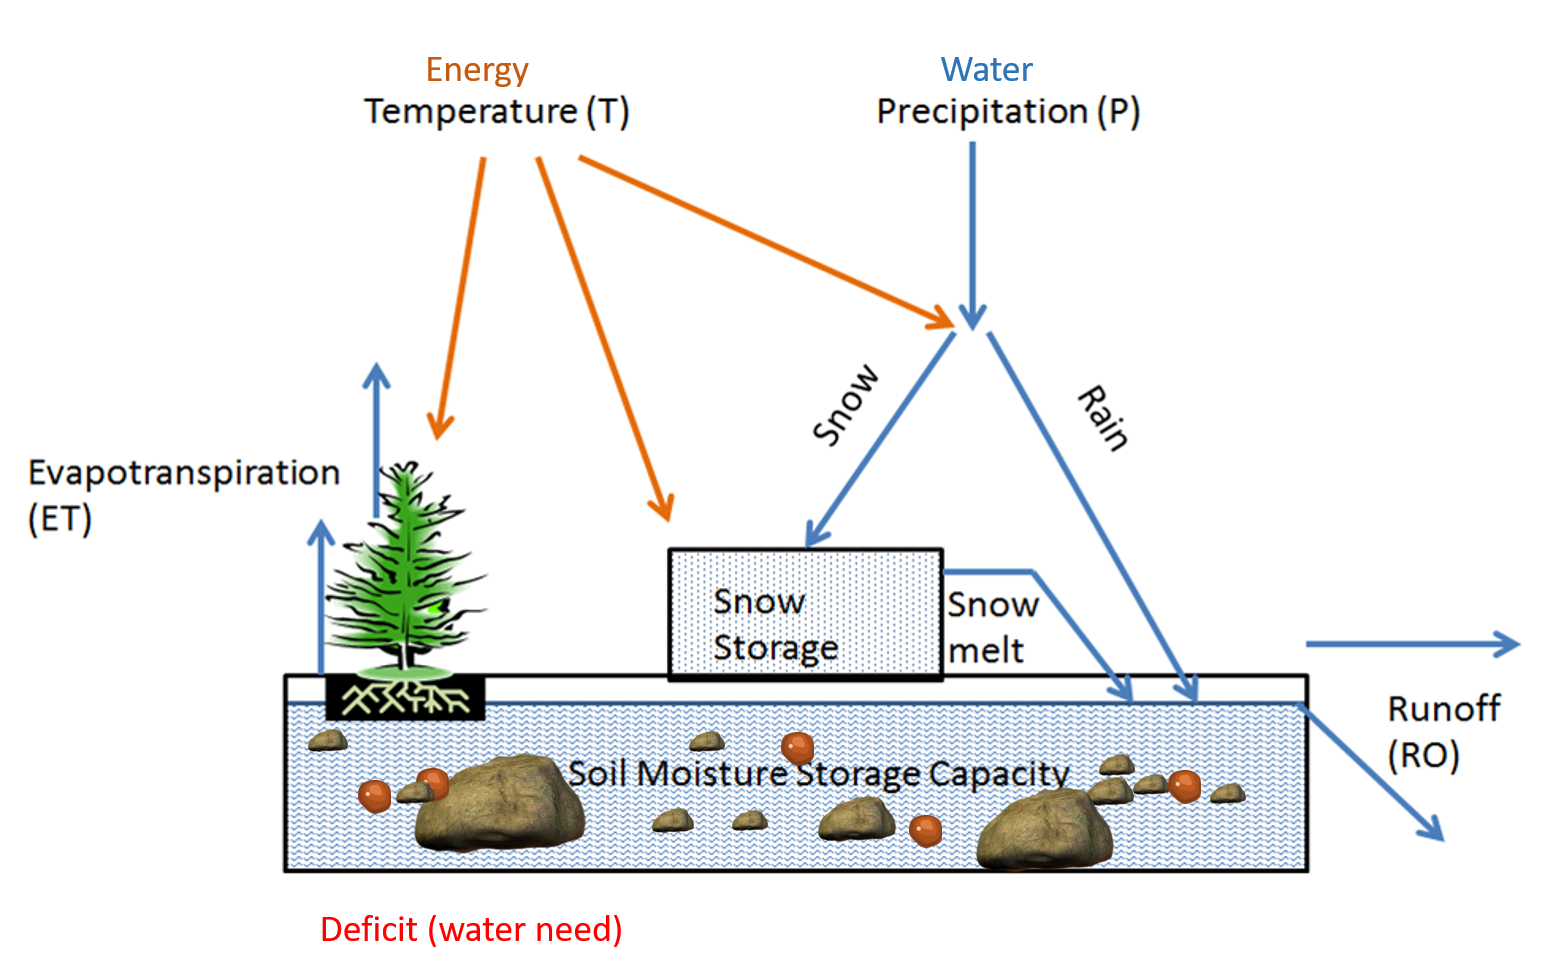 Schematic showing how water moves into and out of a landscape, influenced by energy (temperature)